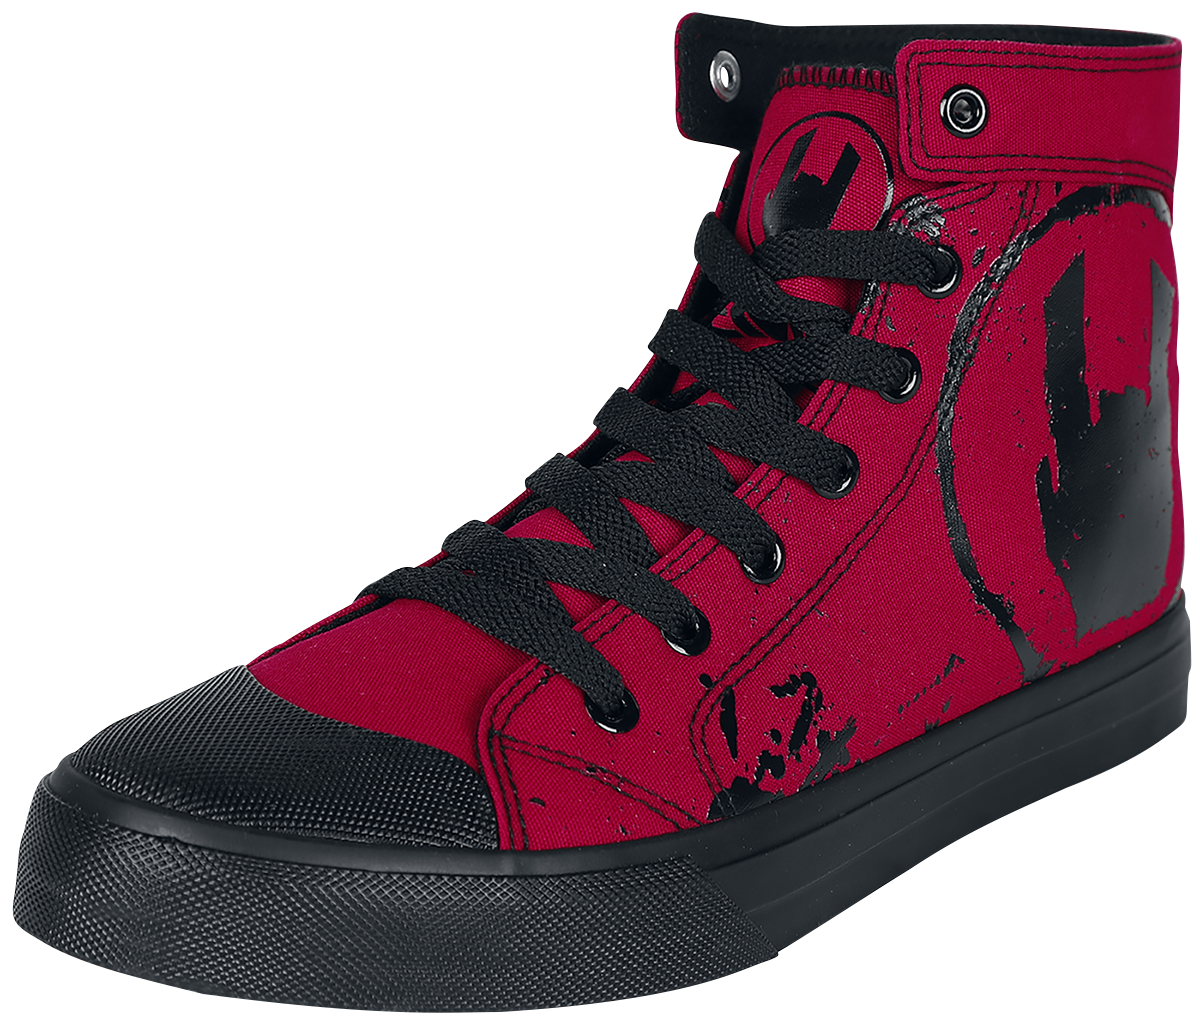 EMP Basic Collection - Rote Sneaker mit Rockhand-Print - Sneaker high - rot - EMP Exklusiv!